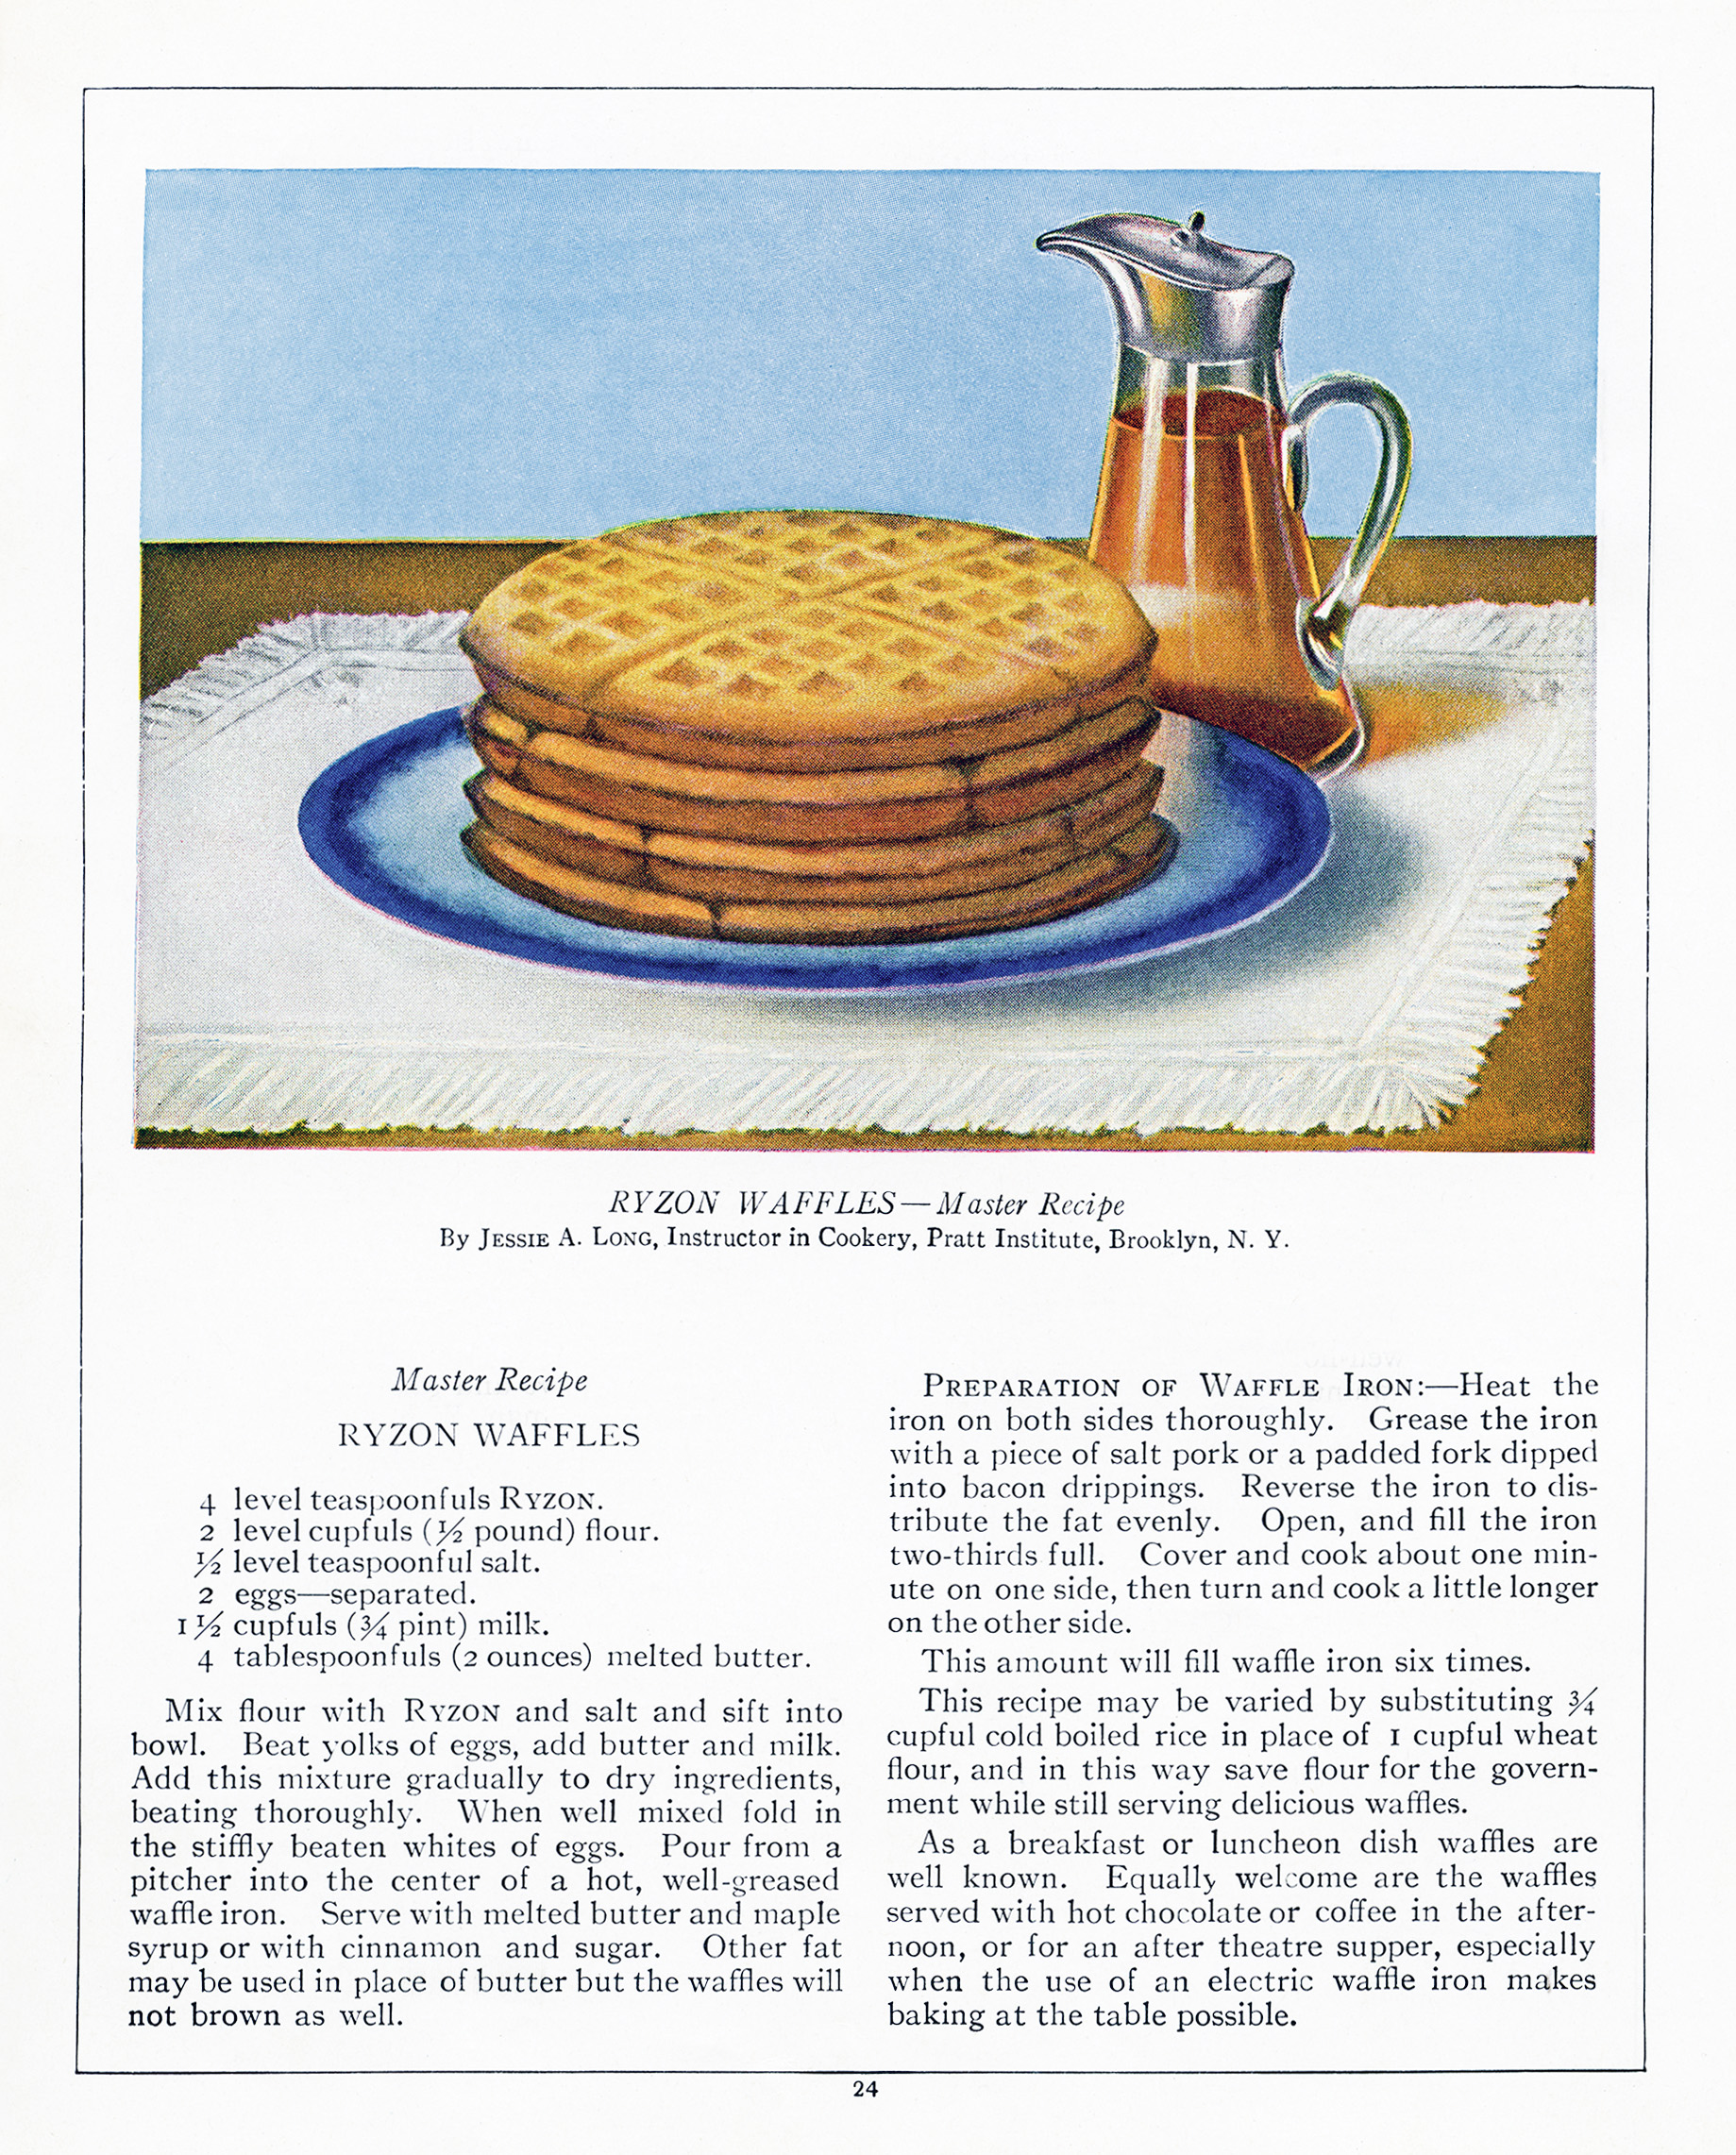 ryzon waffle recipe, old fashioned waffles, antique cookbook page, vintage breakfast image, plate of waffles clip art